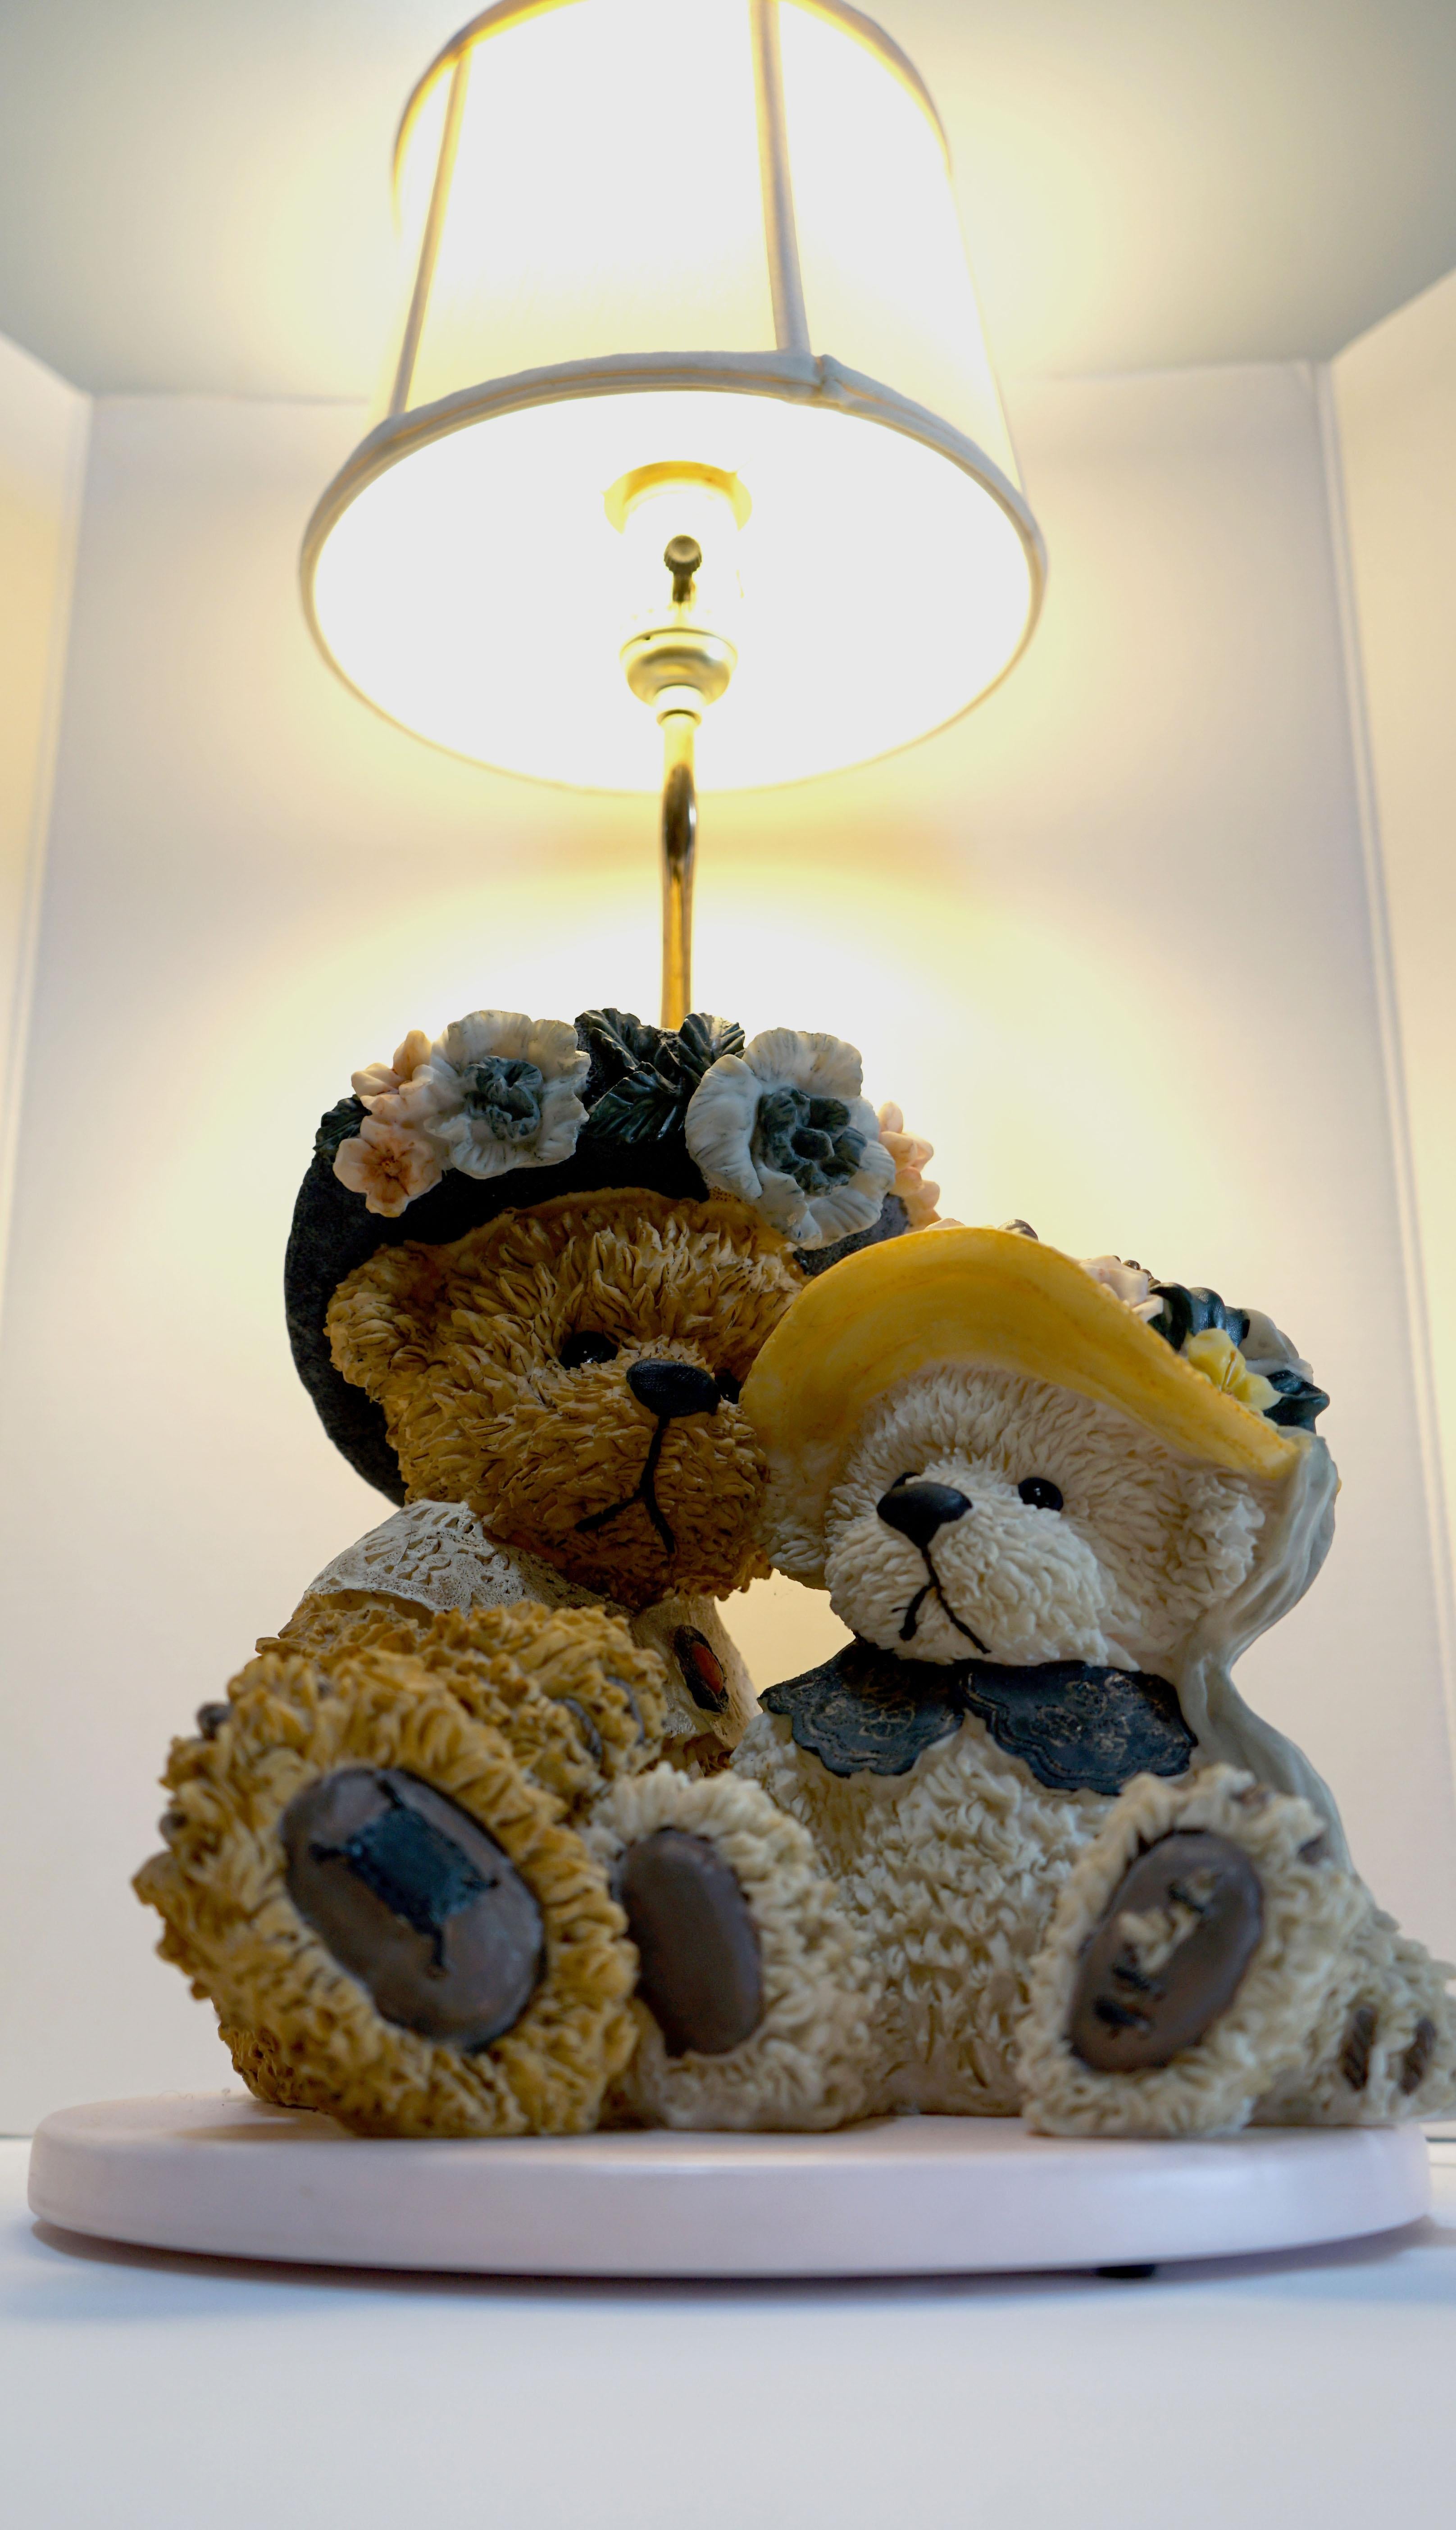 This lamp is a great focal point in a child's area. The teddy bears are having a picnic and your favorite little person is invited. This beautiful lamp features the most elegant teddy bears with polka dots and elegant hats and scarves in a